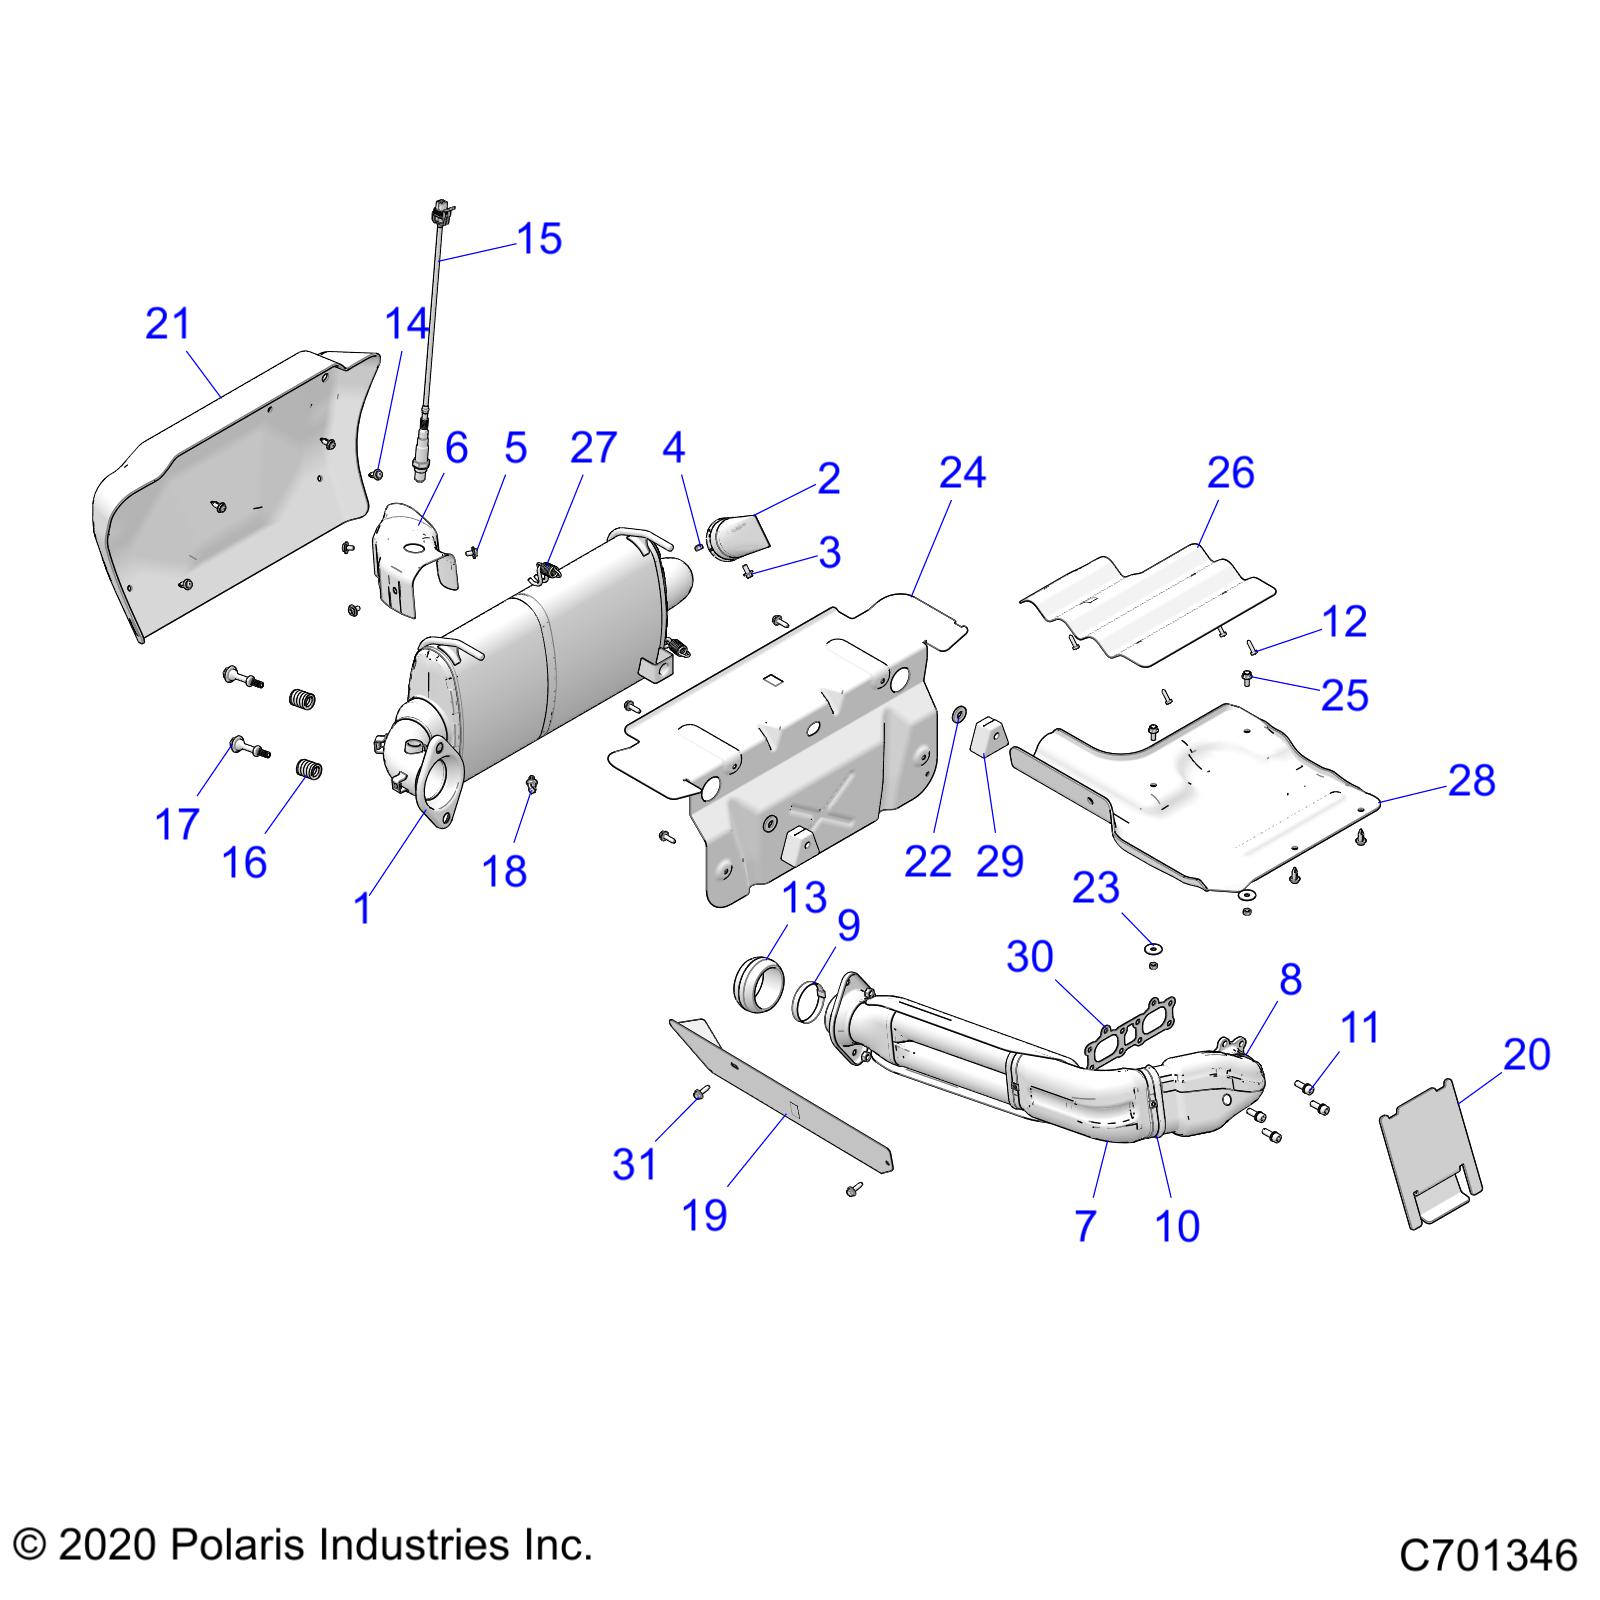 Part Number : 5814245 SHIELD-BOX FRONT